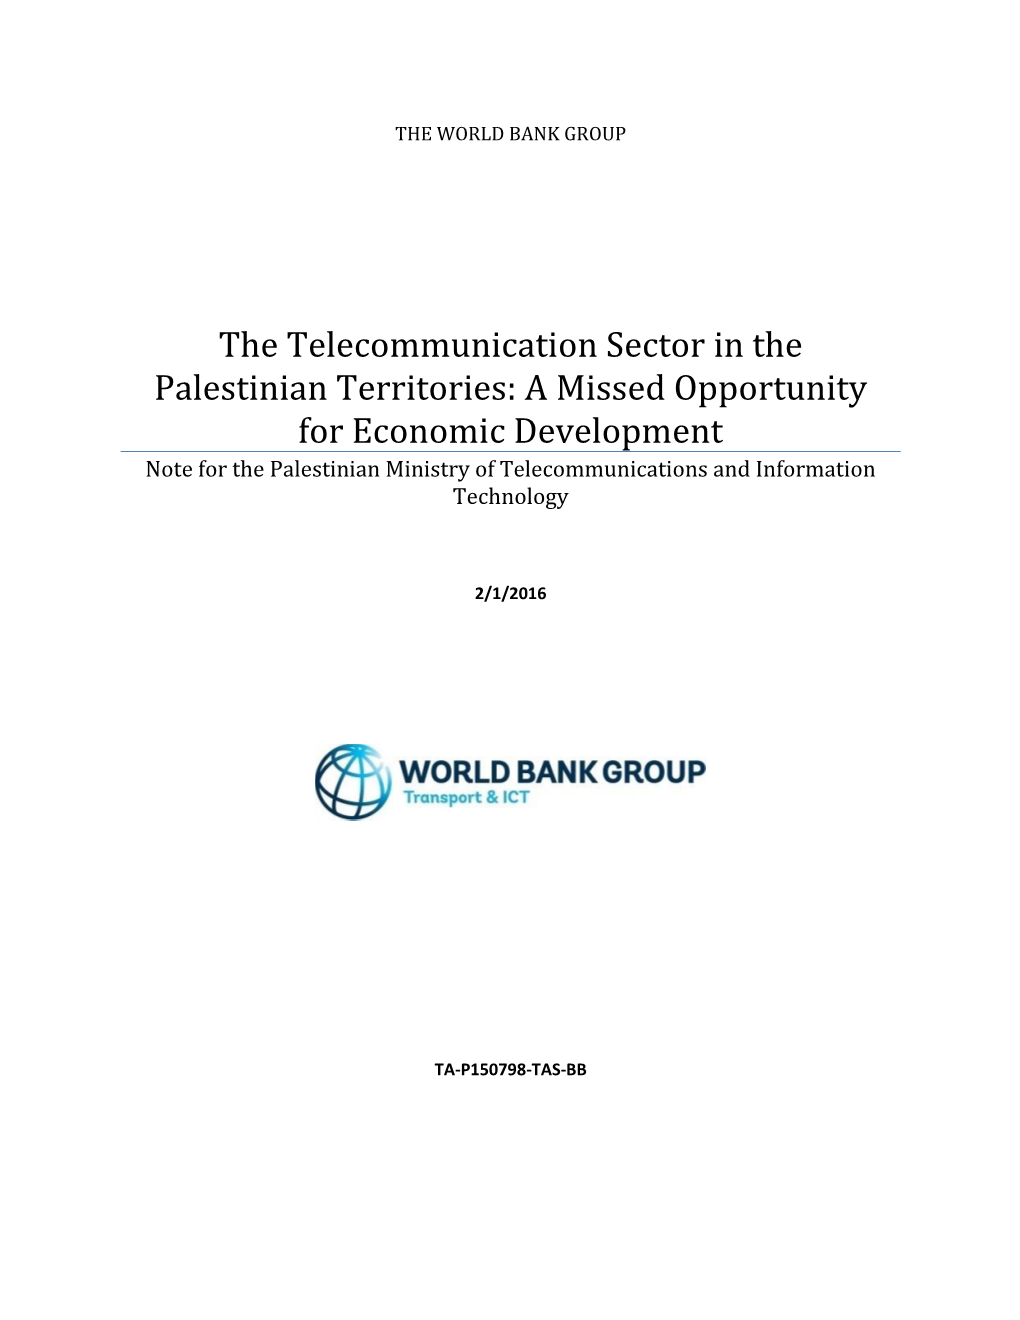 The Telecommunication Sector in the Palestinian Territories: a Missed Opportunity for Economic Development